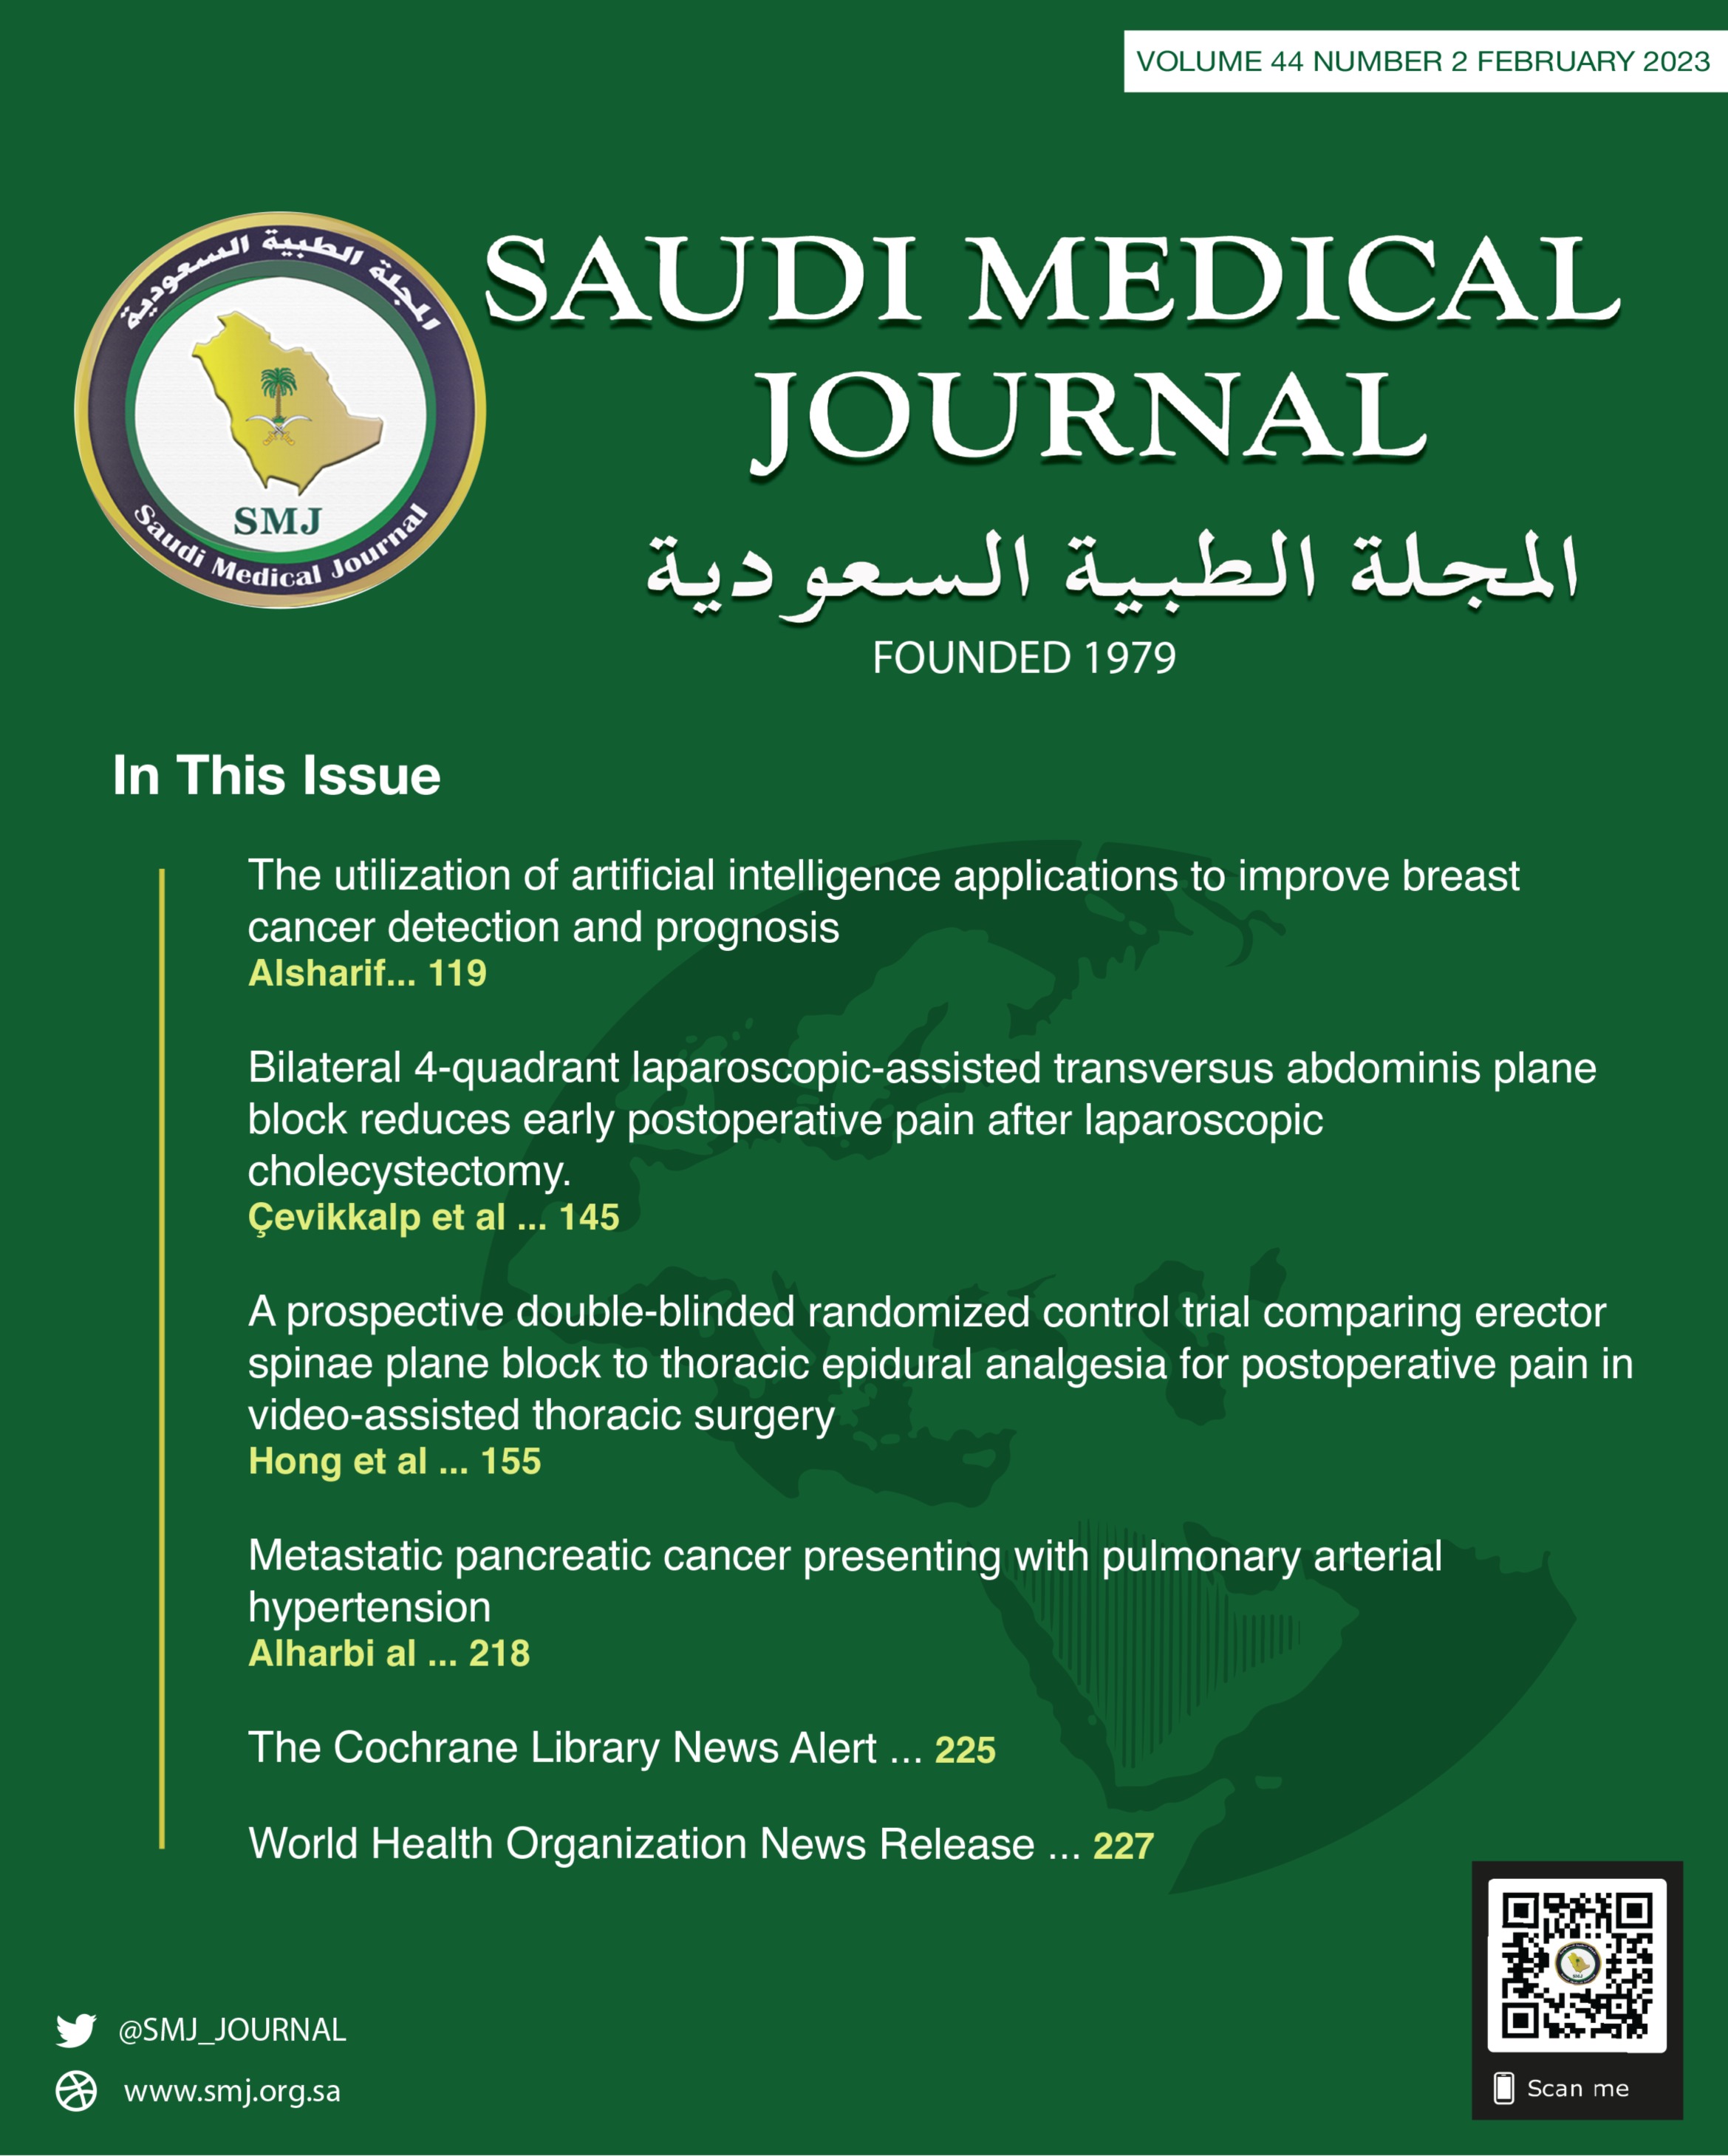 Presentations of active substance use in the emergency department: A single centers perspective study in Riyadh, Saudi Arabia